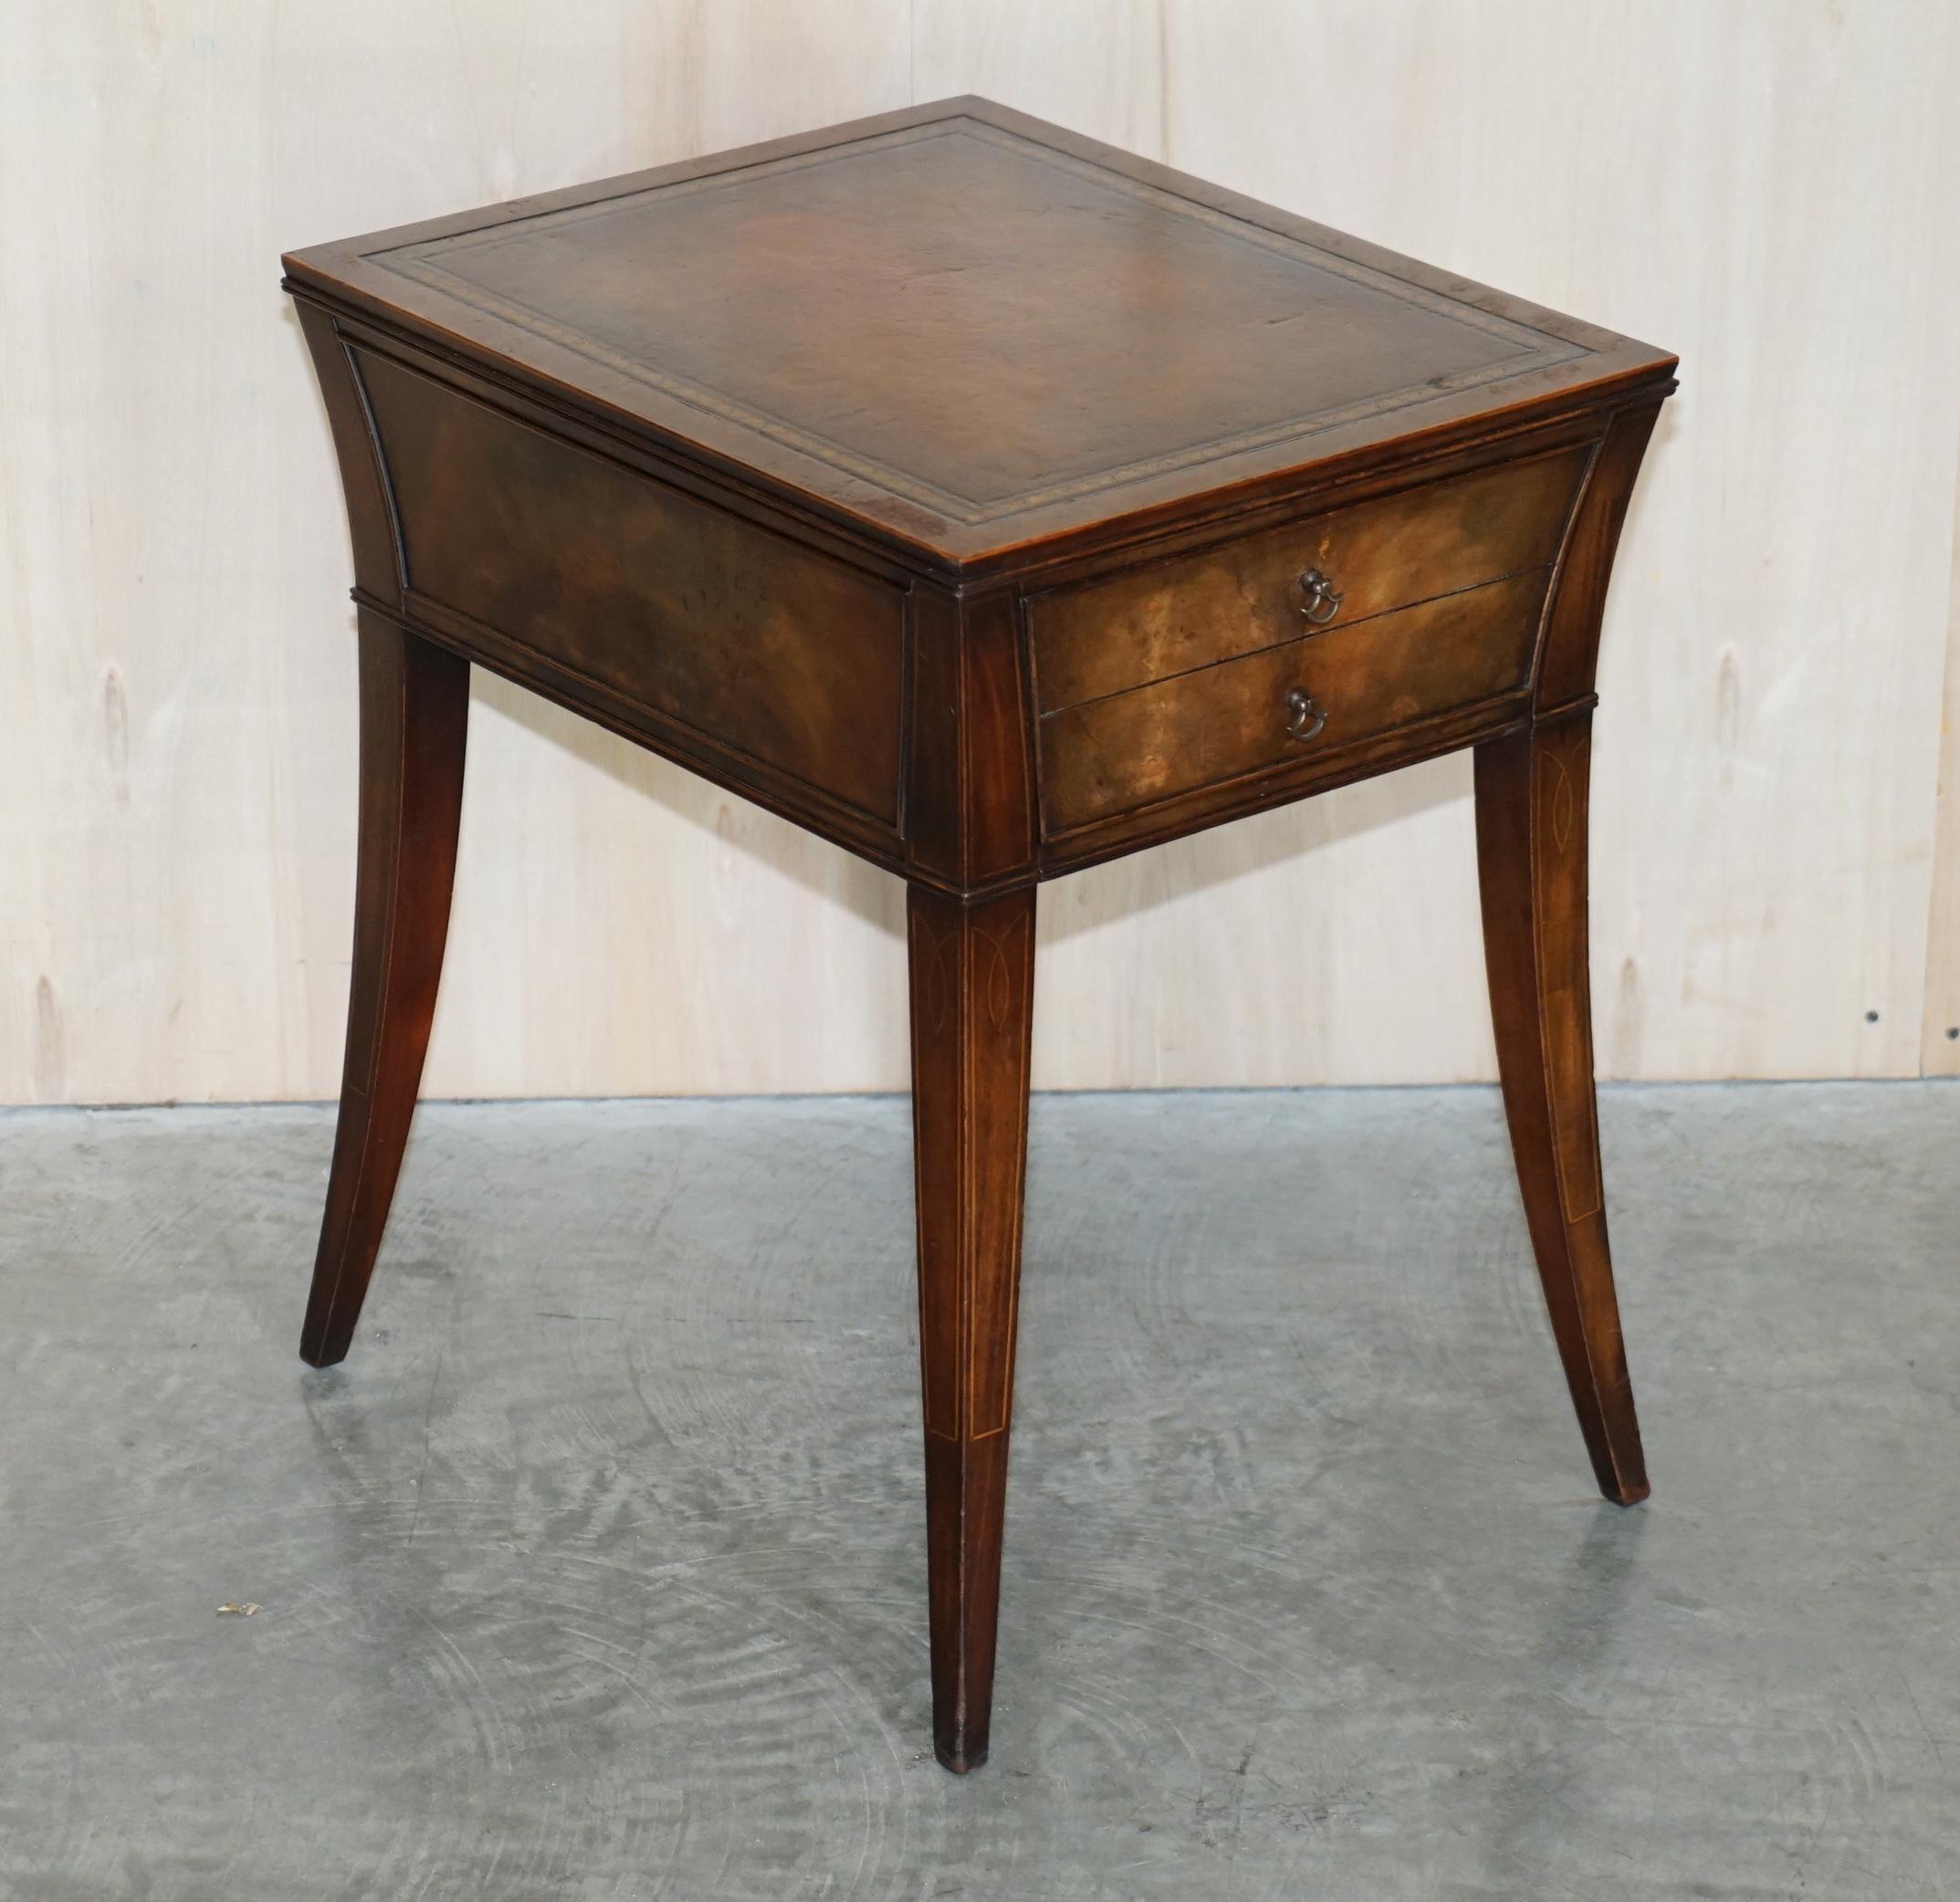 We are delighted to offer for sale this stunning Victorian hand made in England side end lamp or wine table with hand dyed, aged brown leather top.

A very good looking and utilitarian piece, it’s a nicely sized side table, you can easily fit and